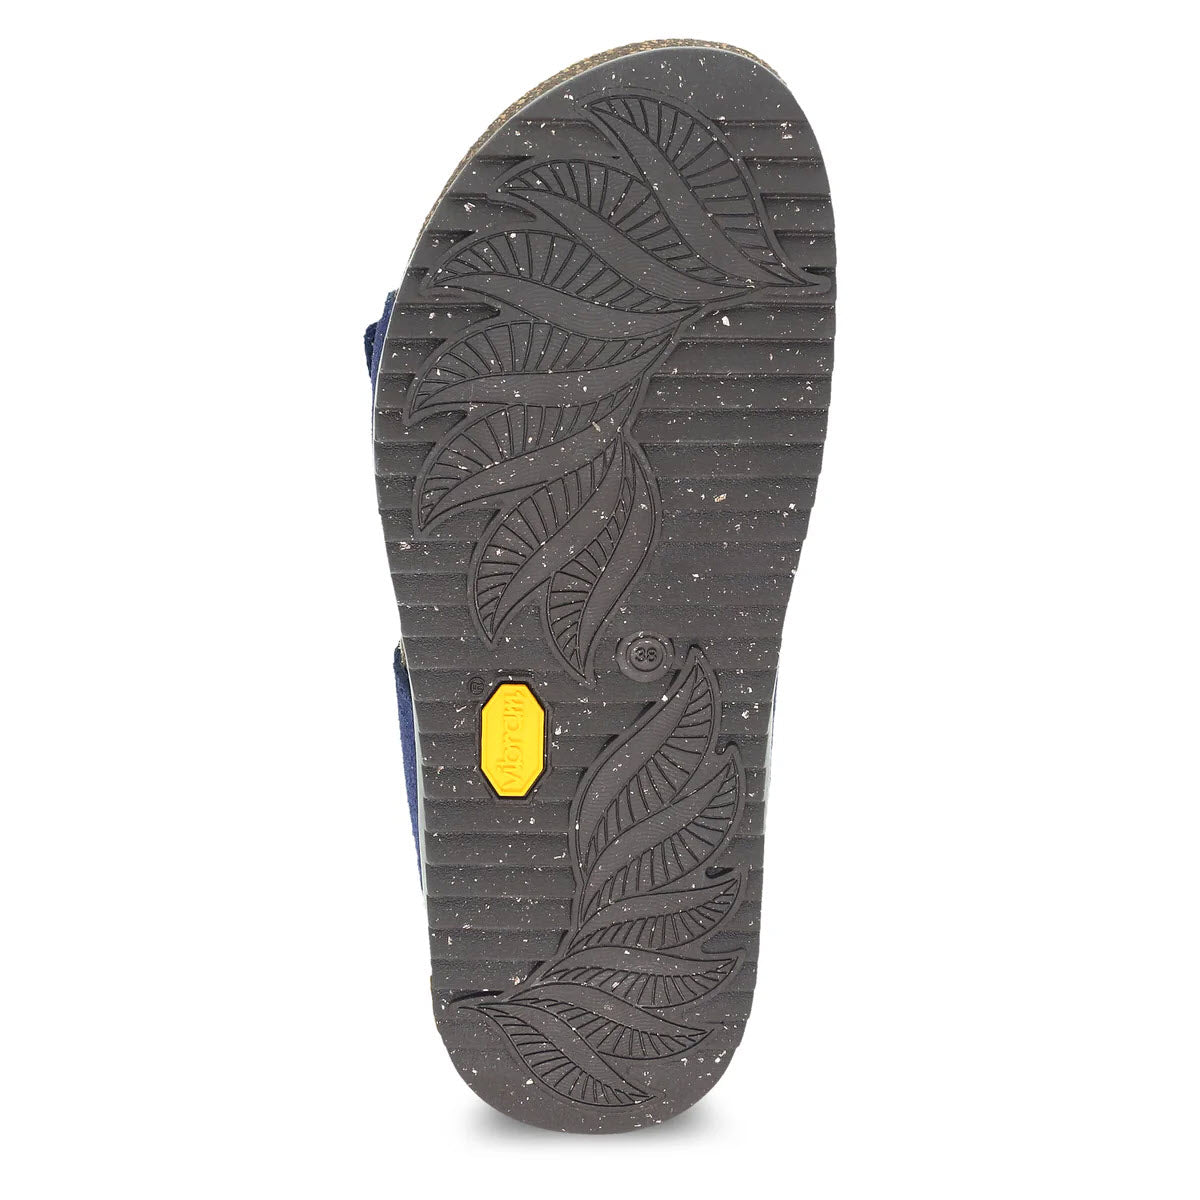 Sole of a shoe displaying a pattern of leaves and lines, with a yellow Dansko ECOSTEP EVO rubber outsole logo in the center.